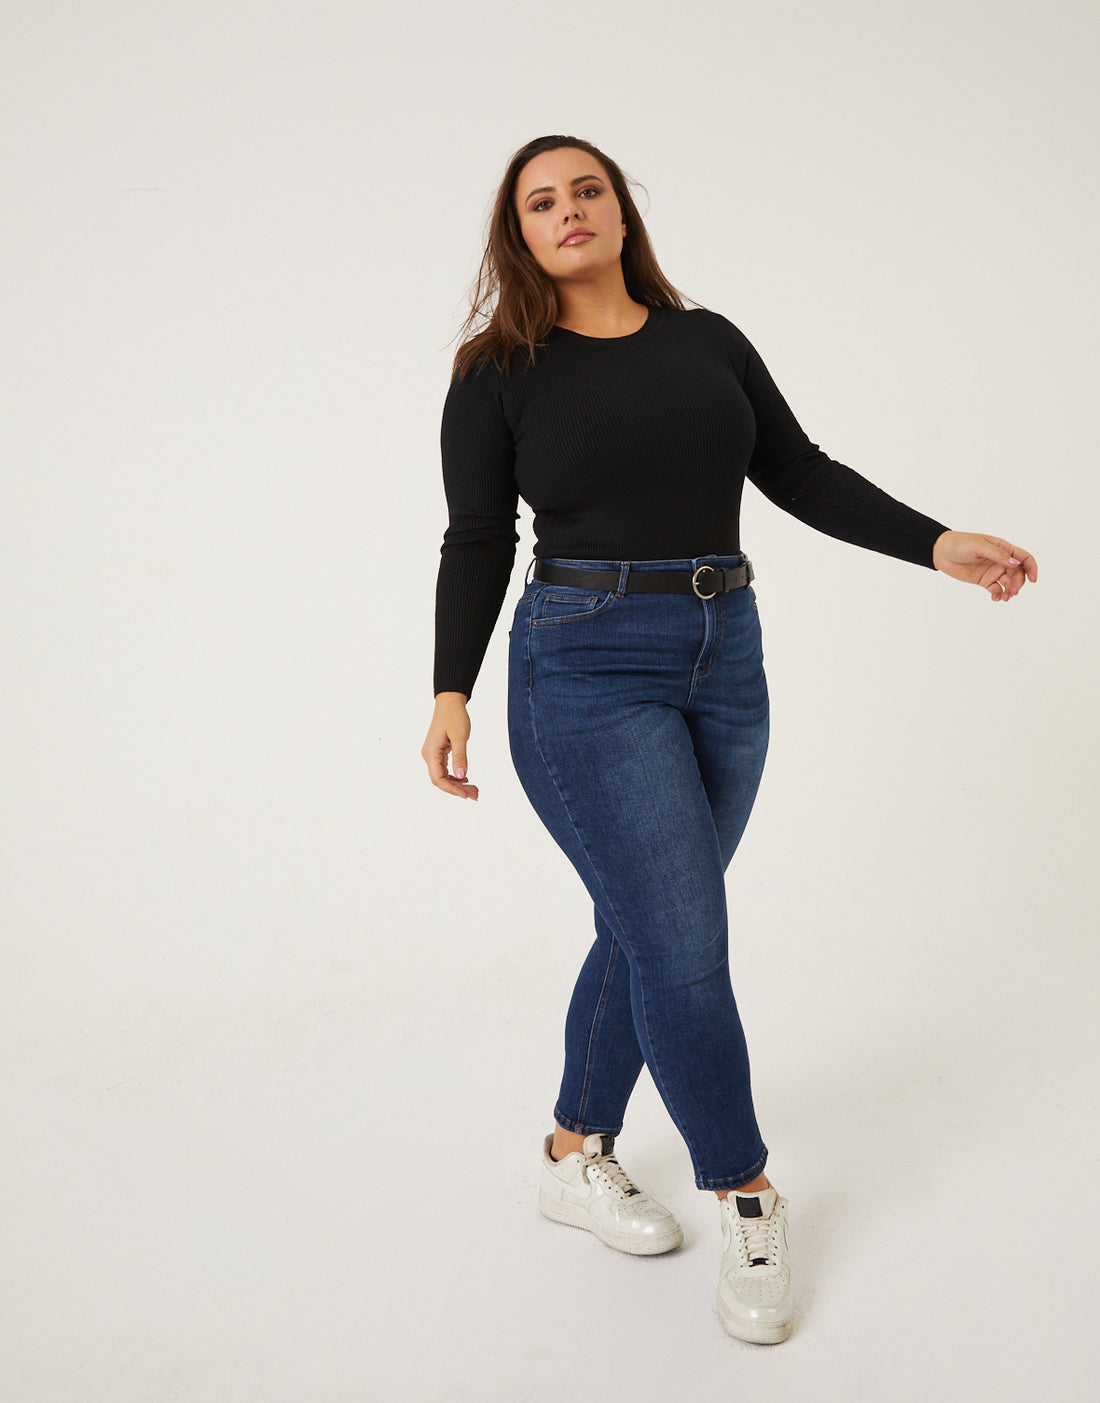 Curve Ribbed Long Sleeve Top Plus Size Tops -2020AVE